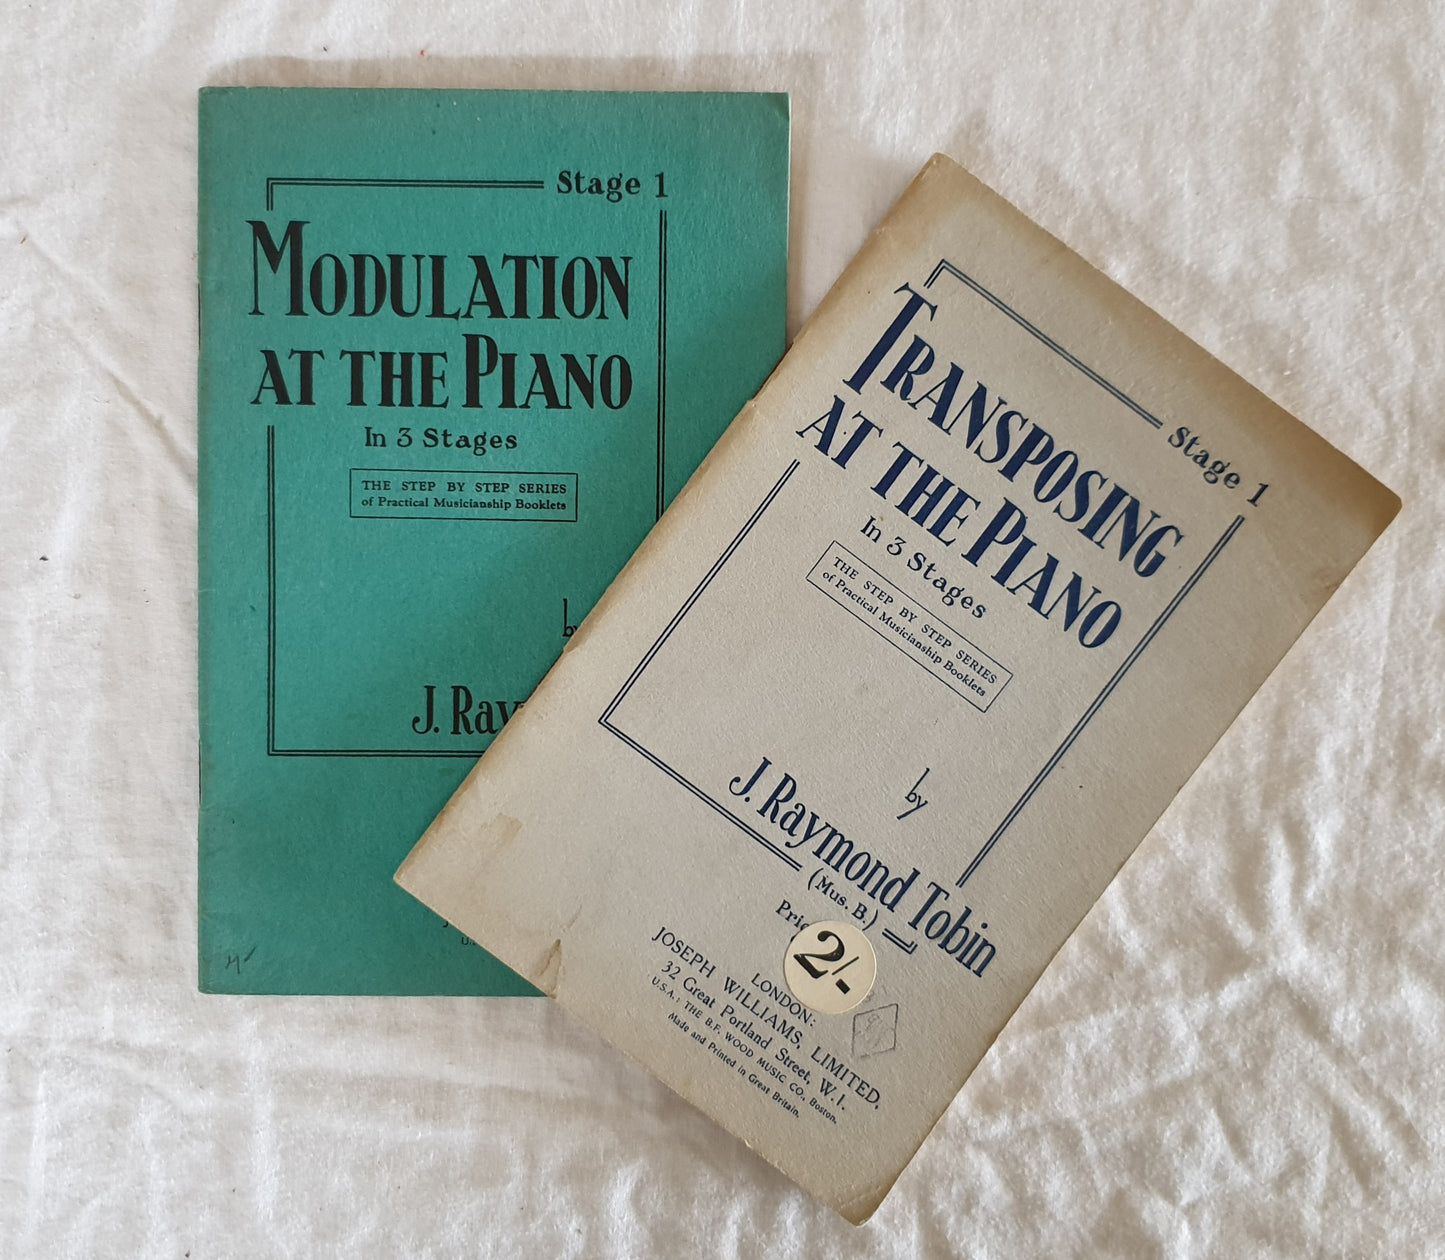 Modulation at the Piano in 3 Stages by J. Raymond Tobin